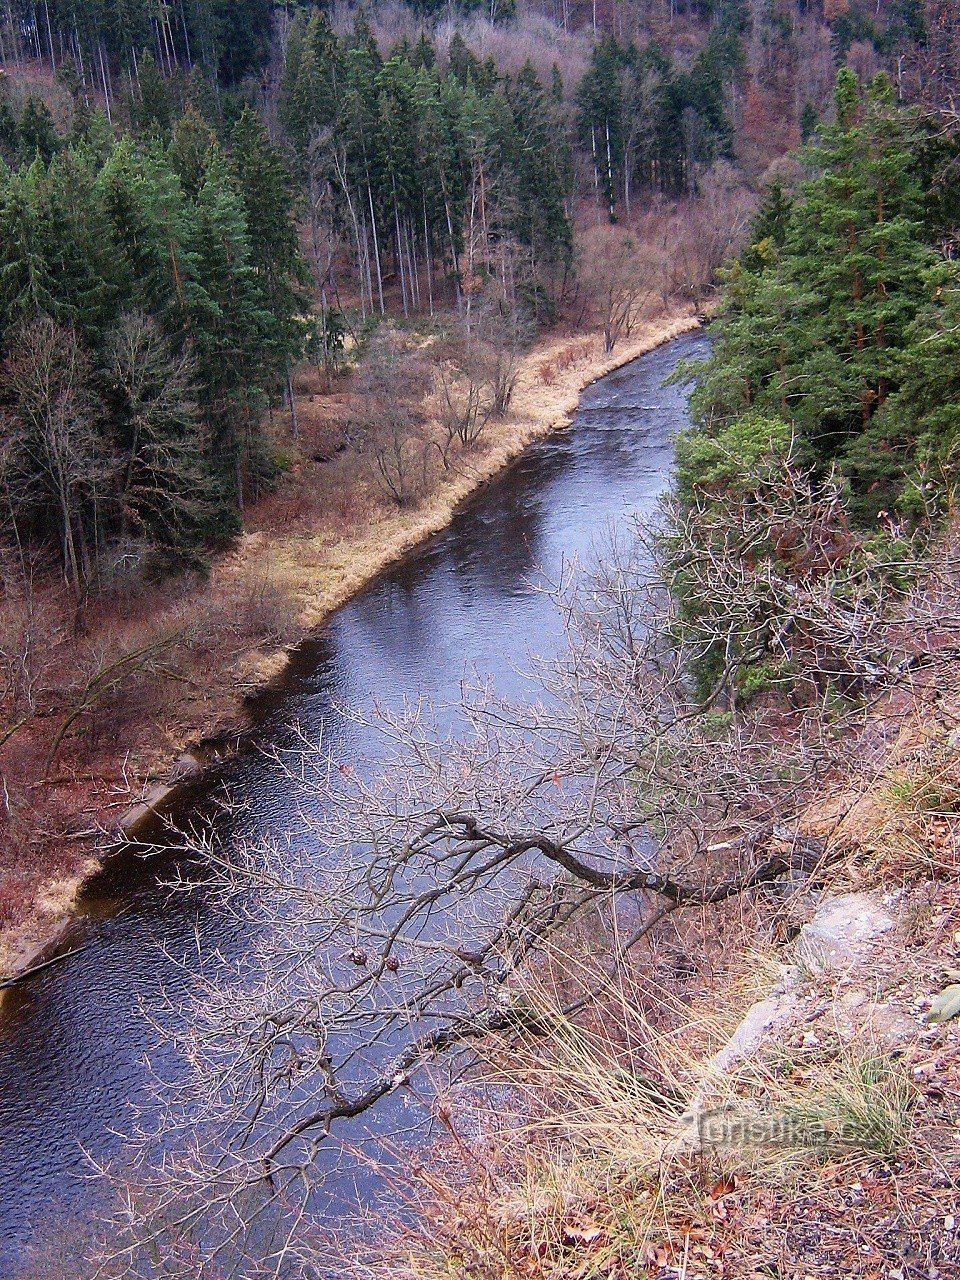 View from above down the river